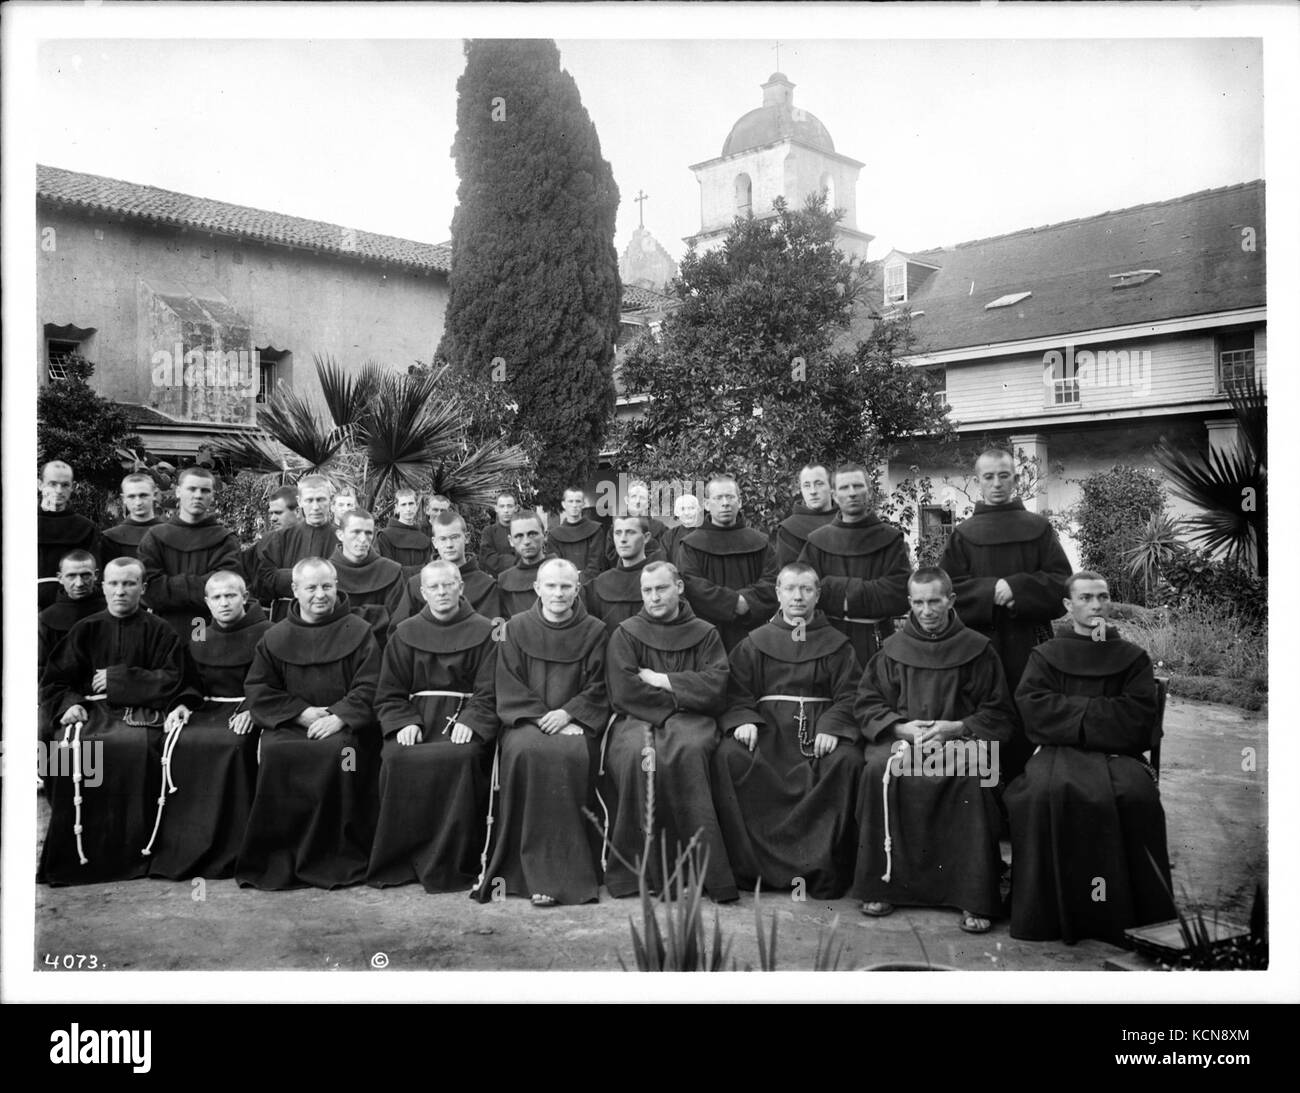 Group portrait of about 30 Franciscan monks outside at Mission Santa Barbara, California, 1904 (CHS 4073) Stock Photo